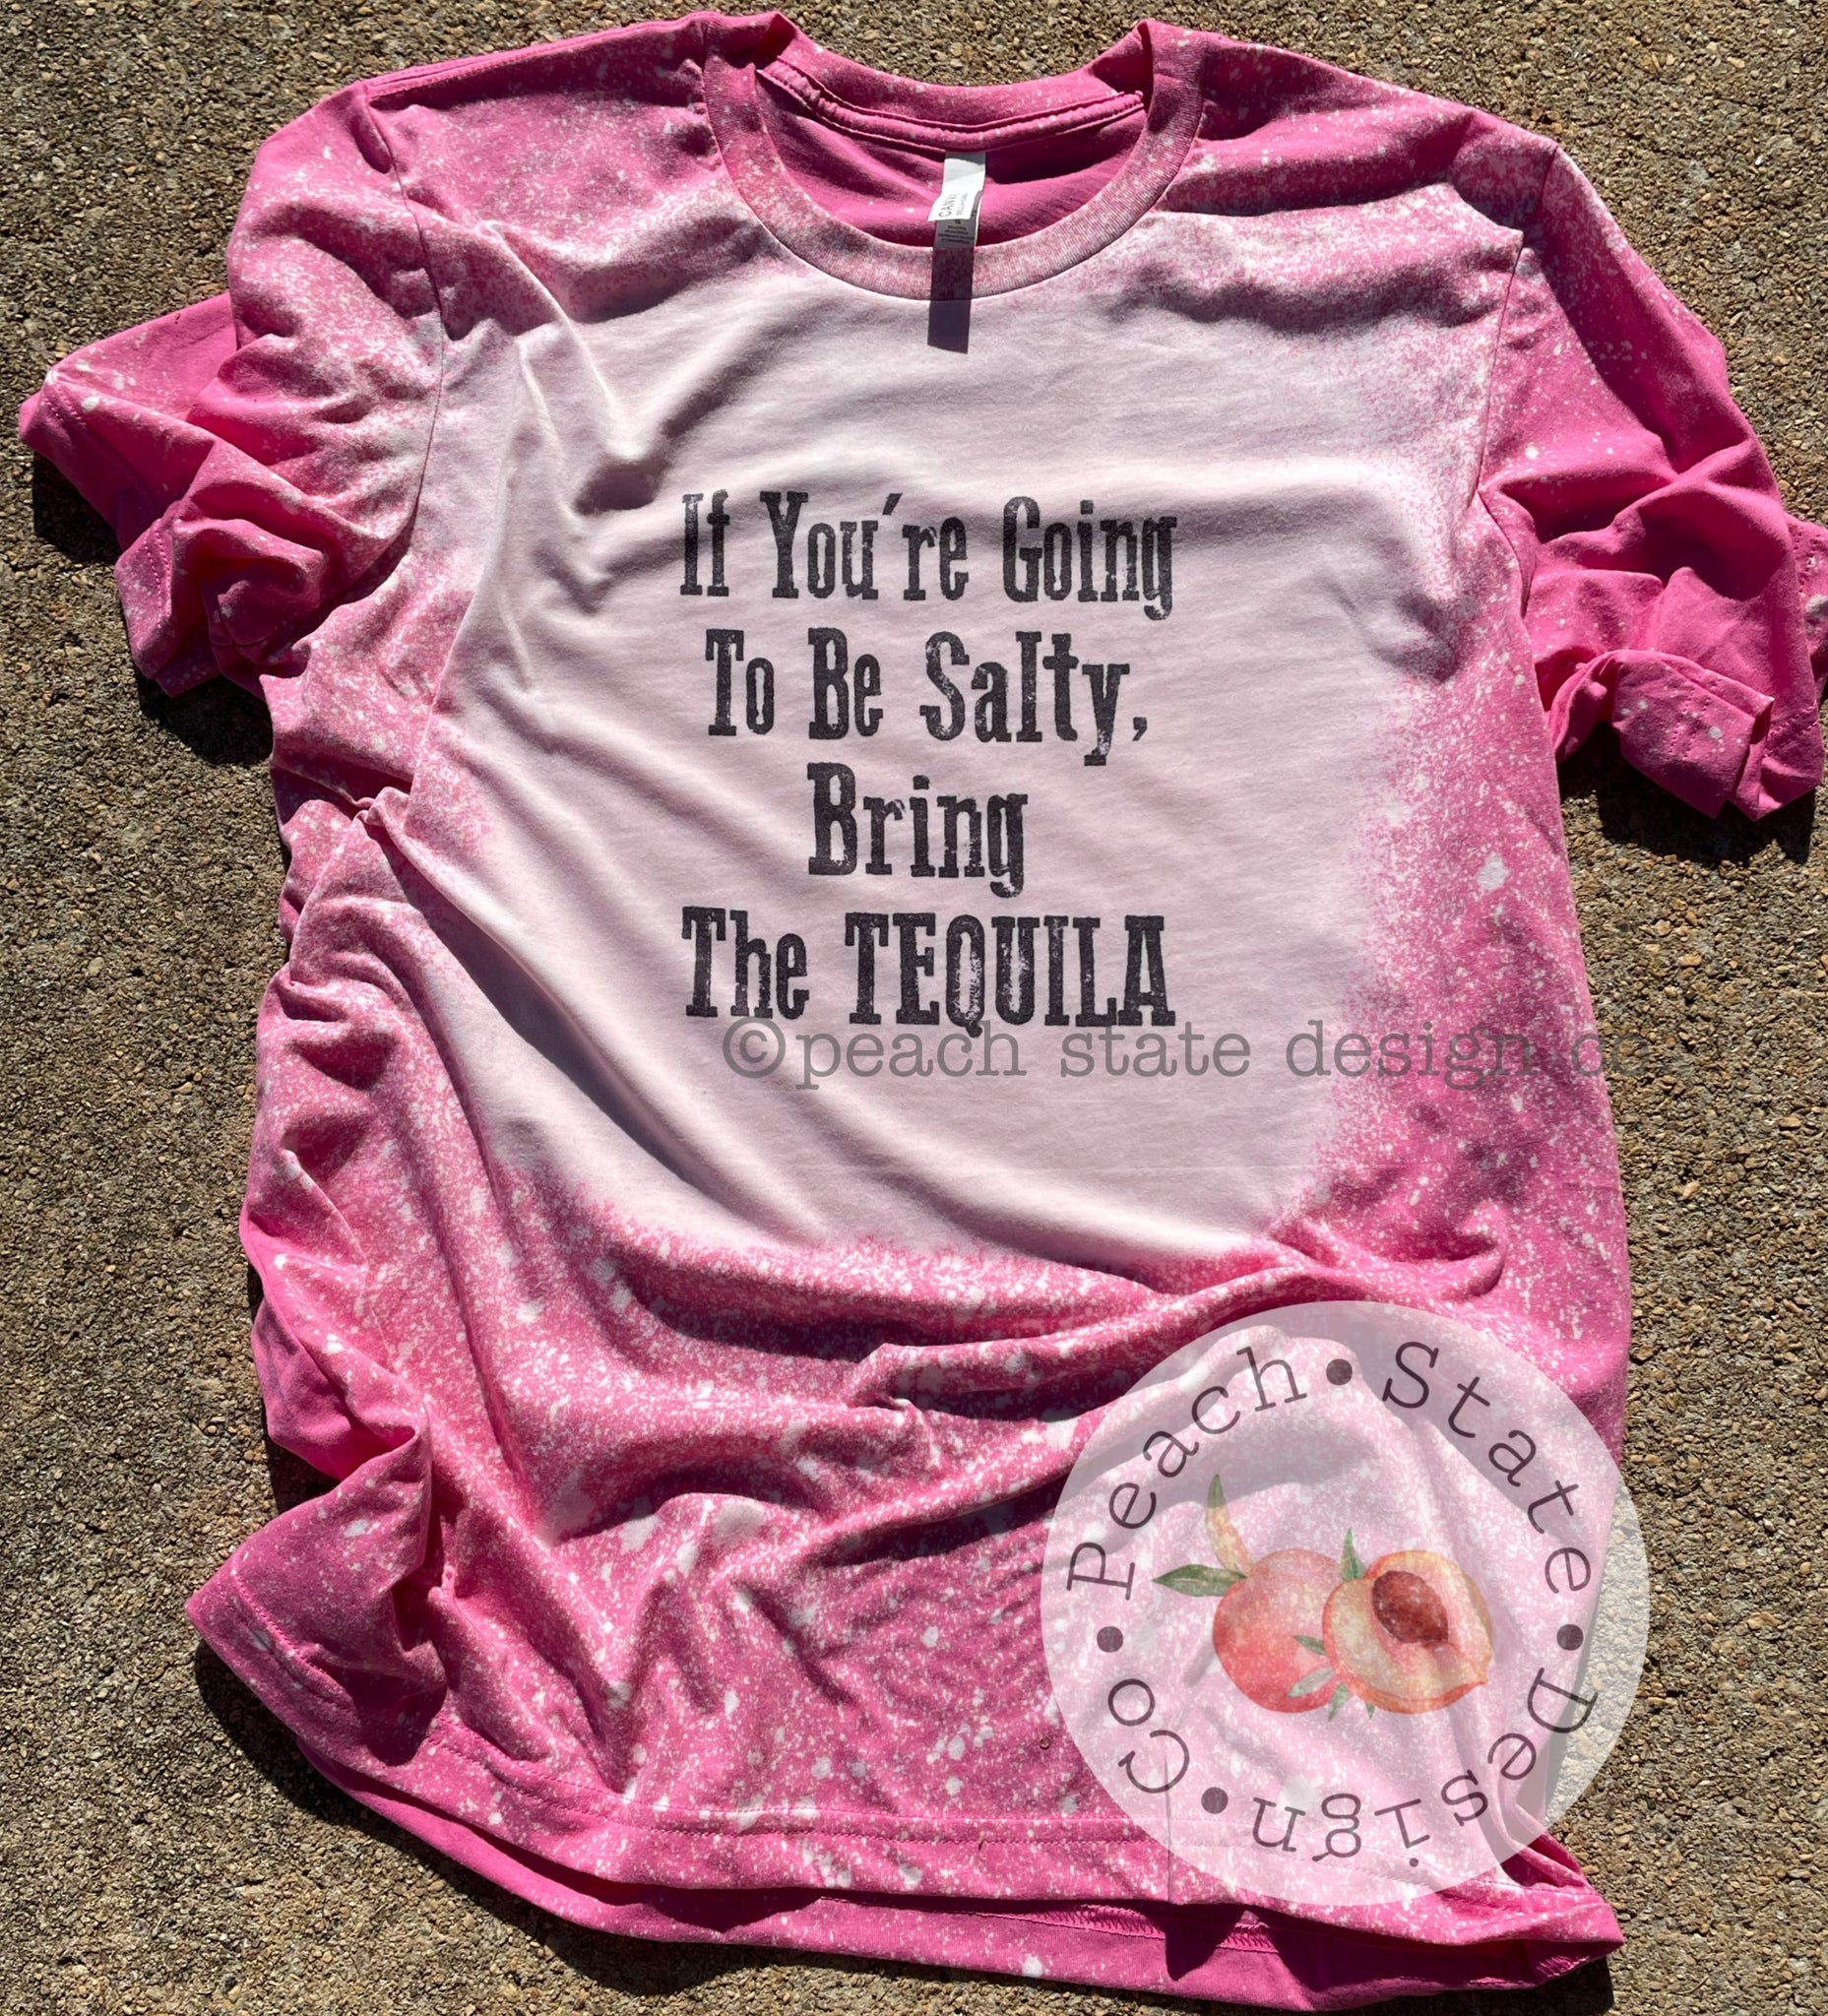 If you’re going to be salty, bring the tequila